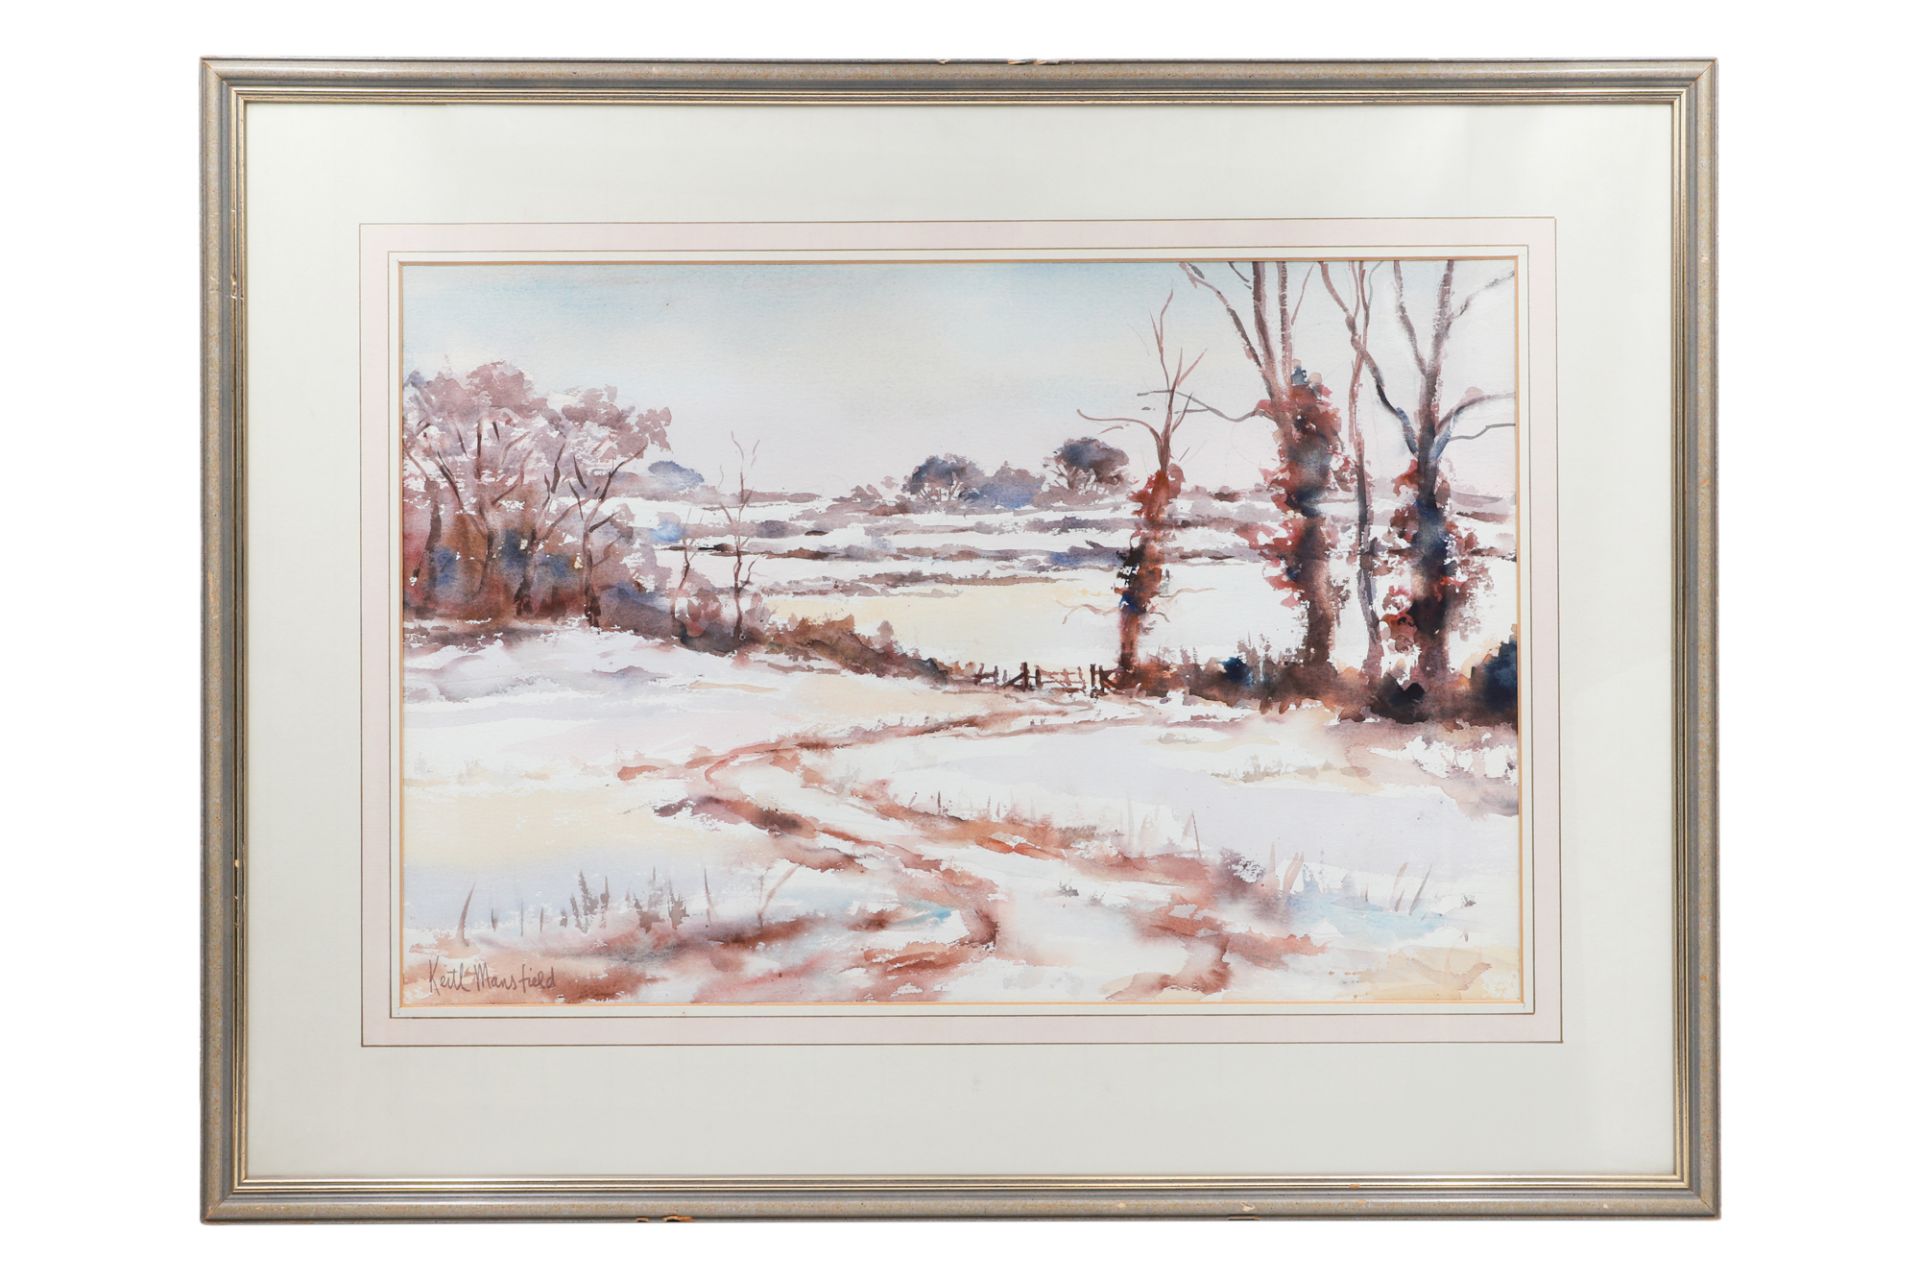 KEITH MANSFIELD (IRISH), 'Winter fields', Watercolour, framed and signed, 29.5" x 22.5"